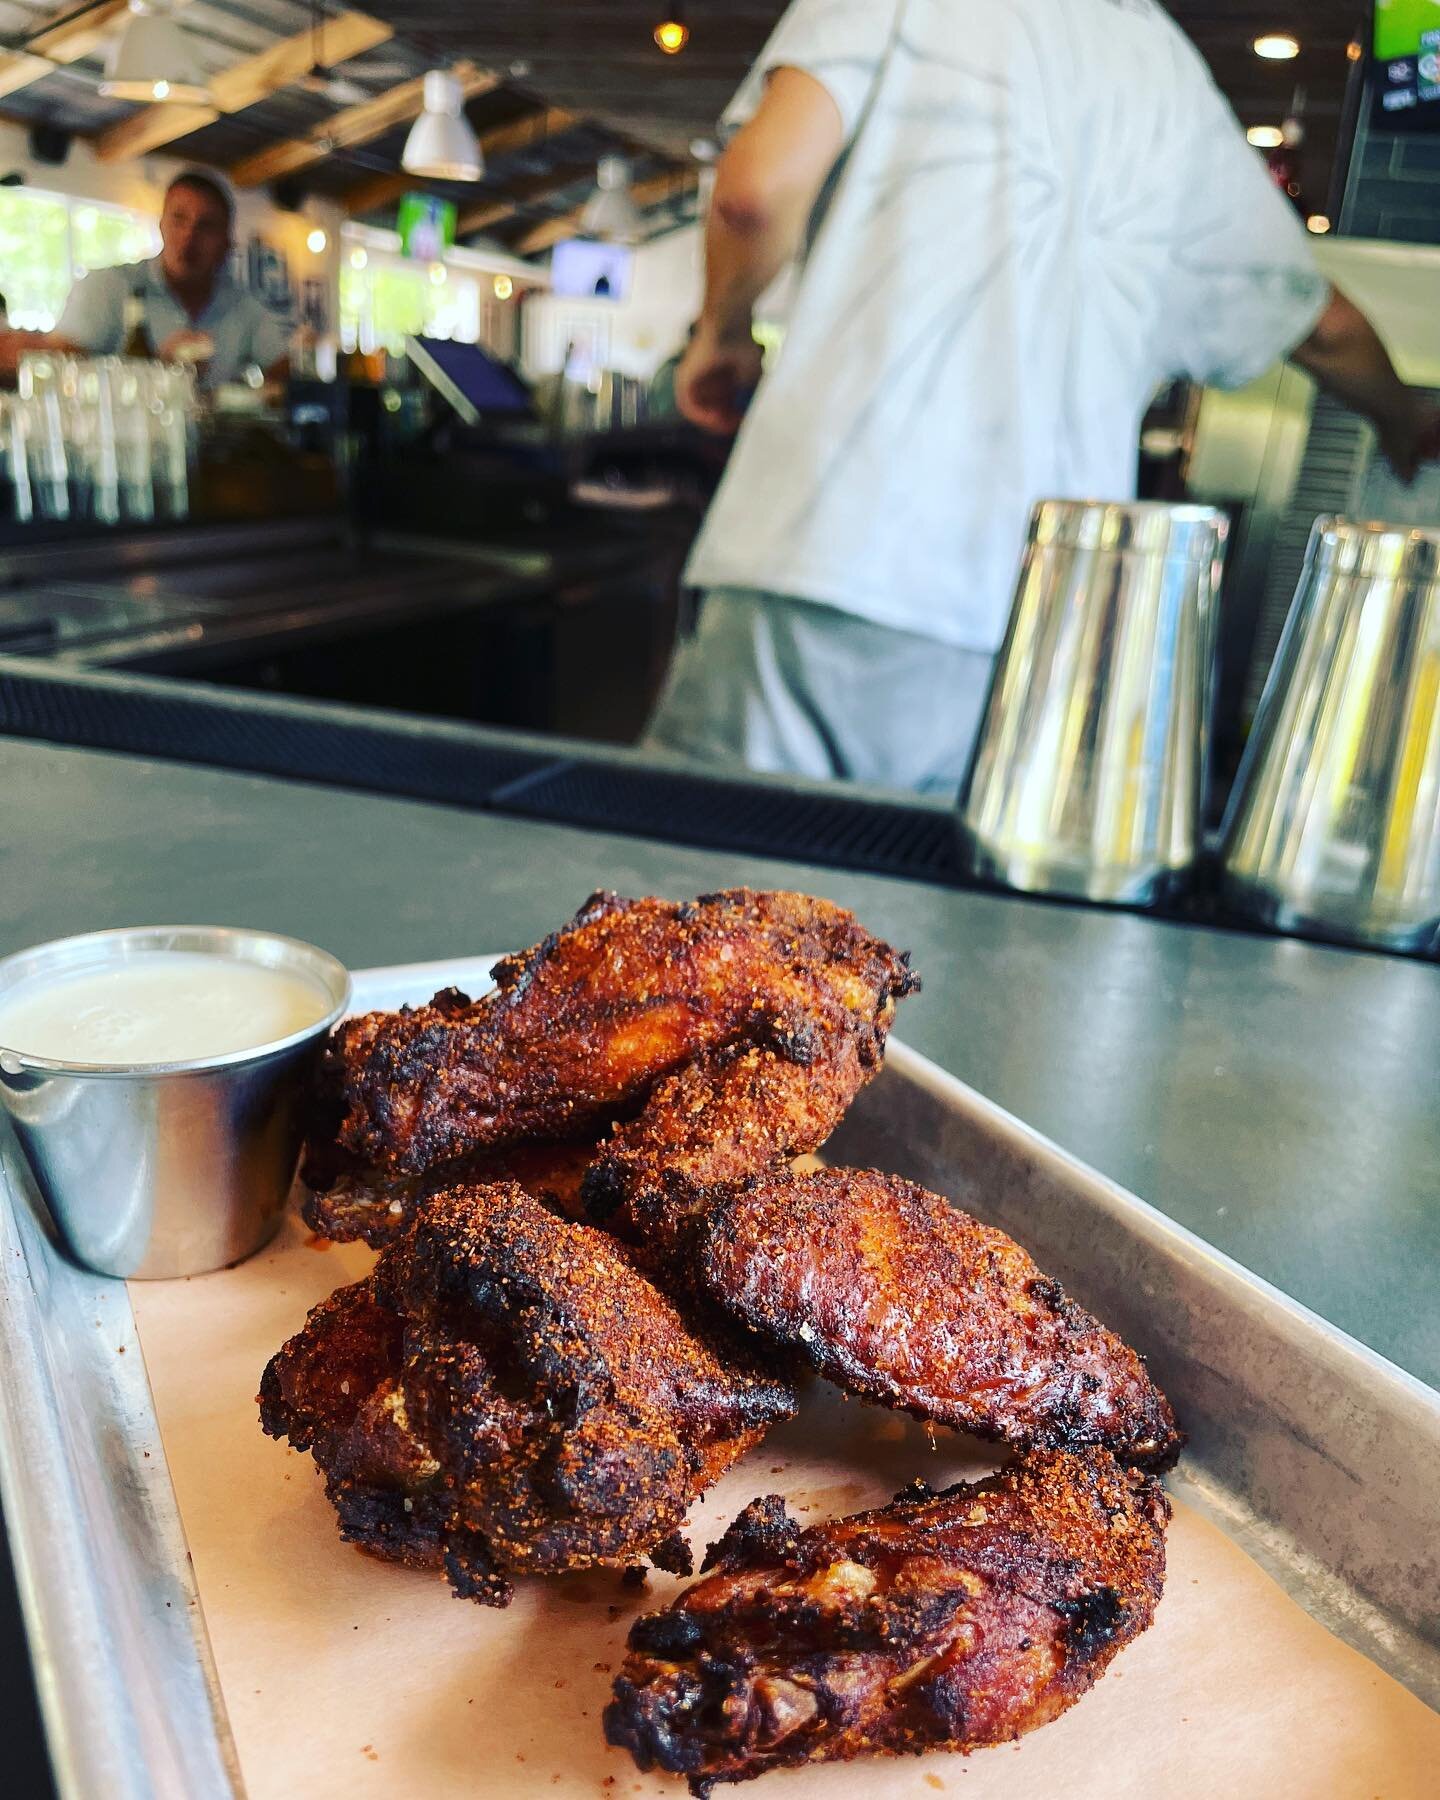 Wing it Wednesday @hometeambbq ⠀⠀⠀⠀⠀⠀⠀⠀⠀
⠀⠀⠀⠀⠀⠀⠀ ⠀⠀
⠀⠀⠀⠀⠀⠀⠀⠀⠀
⠀⠀⠀⠀⠀⠀⠀⠀⠀
⠀⠀⠀⠀⠀⠀⠀⠀⠀
#MyPleasantCity #MyPleasantEats #Charleston #MountPleasant #MtP #ExploreCharleston #MtPEats #ExploreMountPleasant #Food #CHSEats #EatLocal #Local #Lowcountry #Eat #Eats